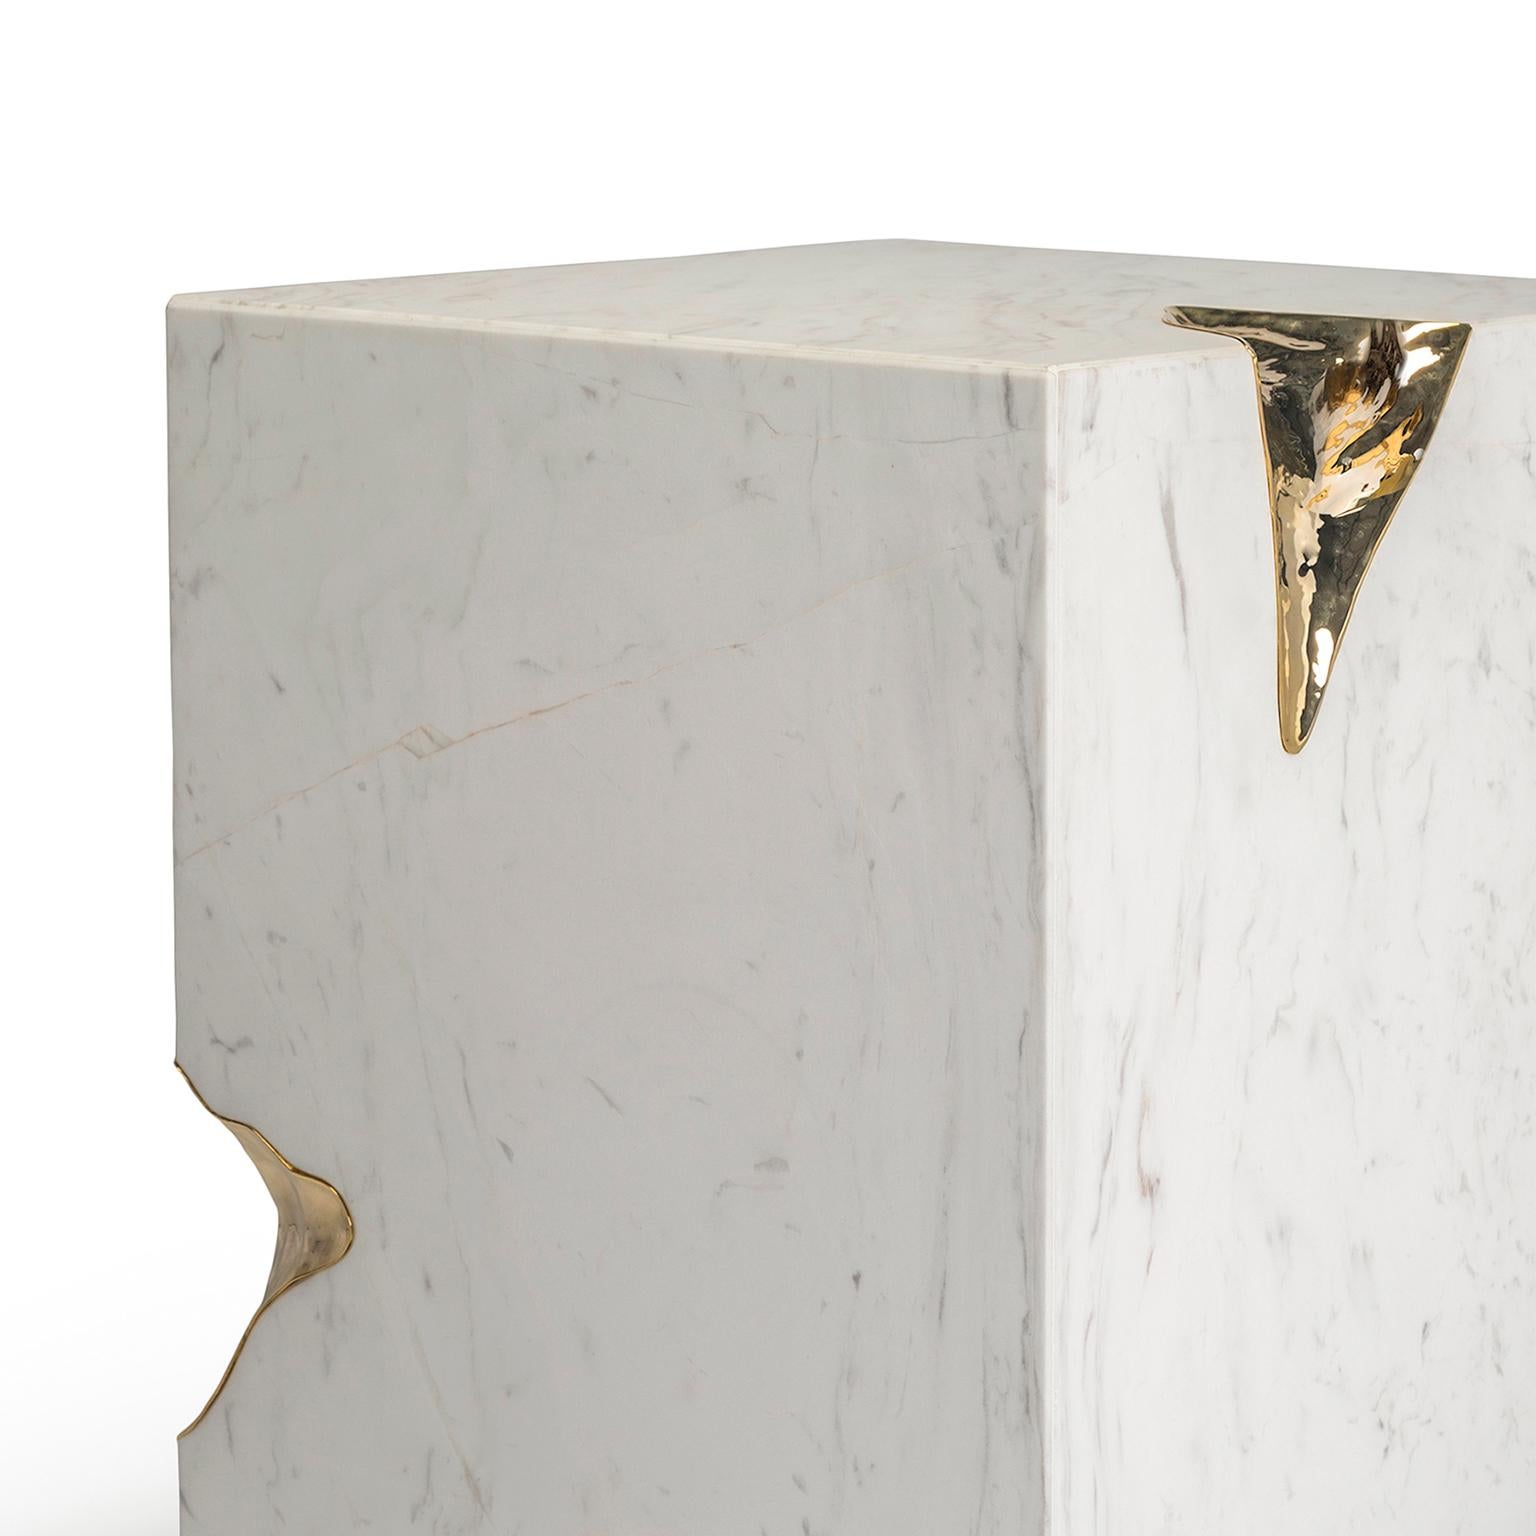 Portuguese Modern Ruins Side Table in White Greek Marble and Gold-Plated Details For Sale